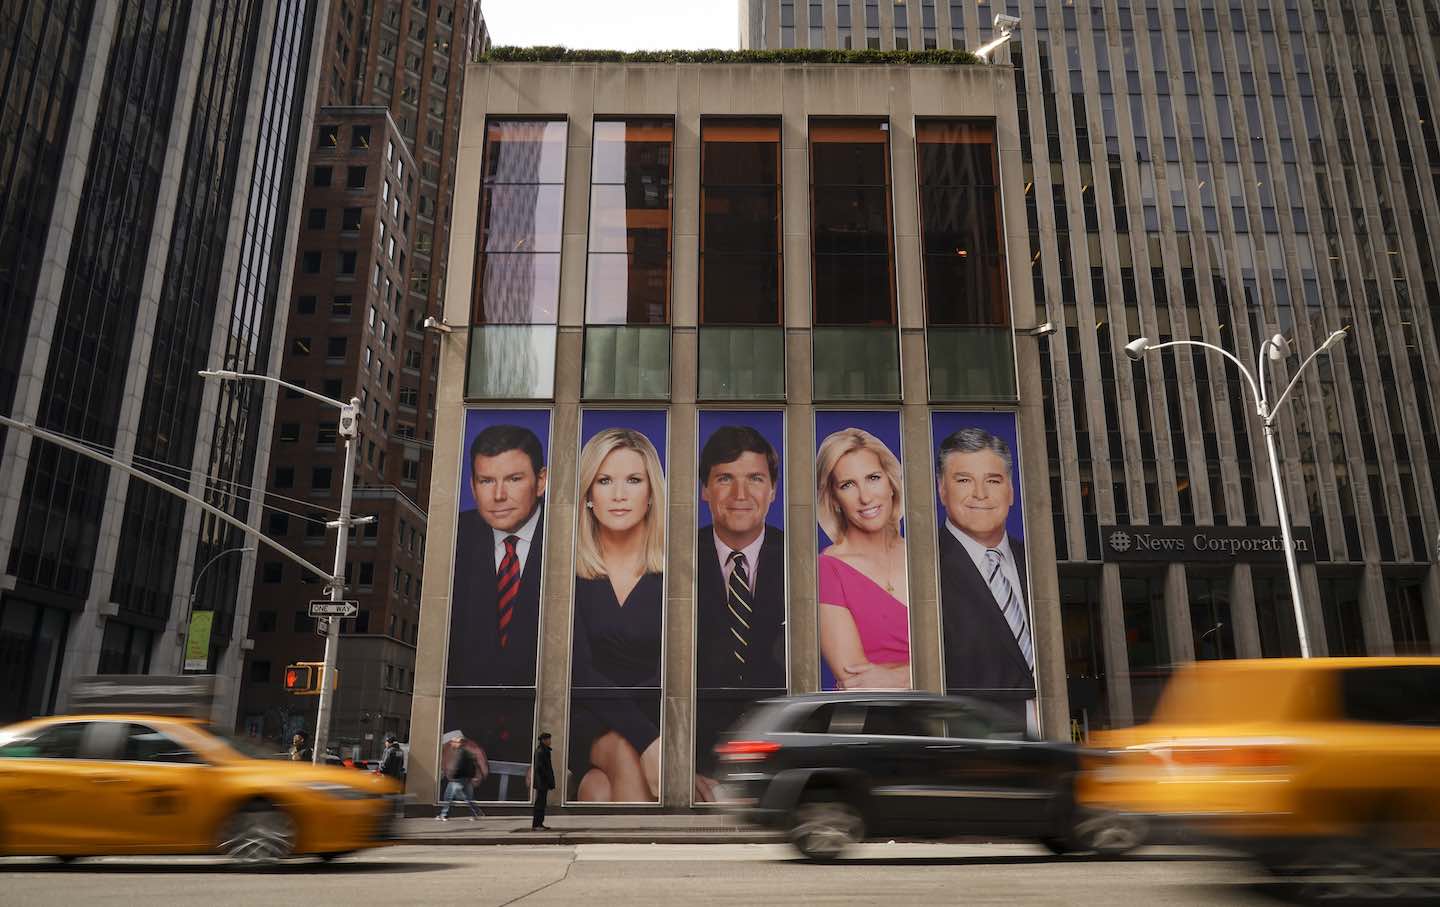 The front of the News Corporation building in New York City